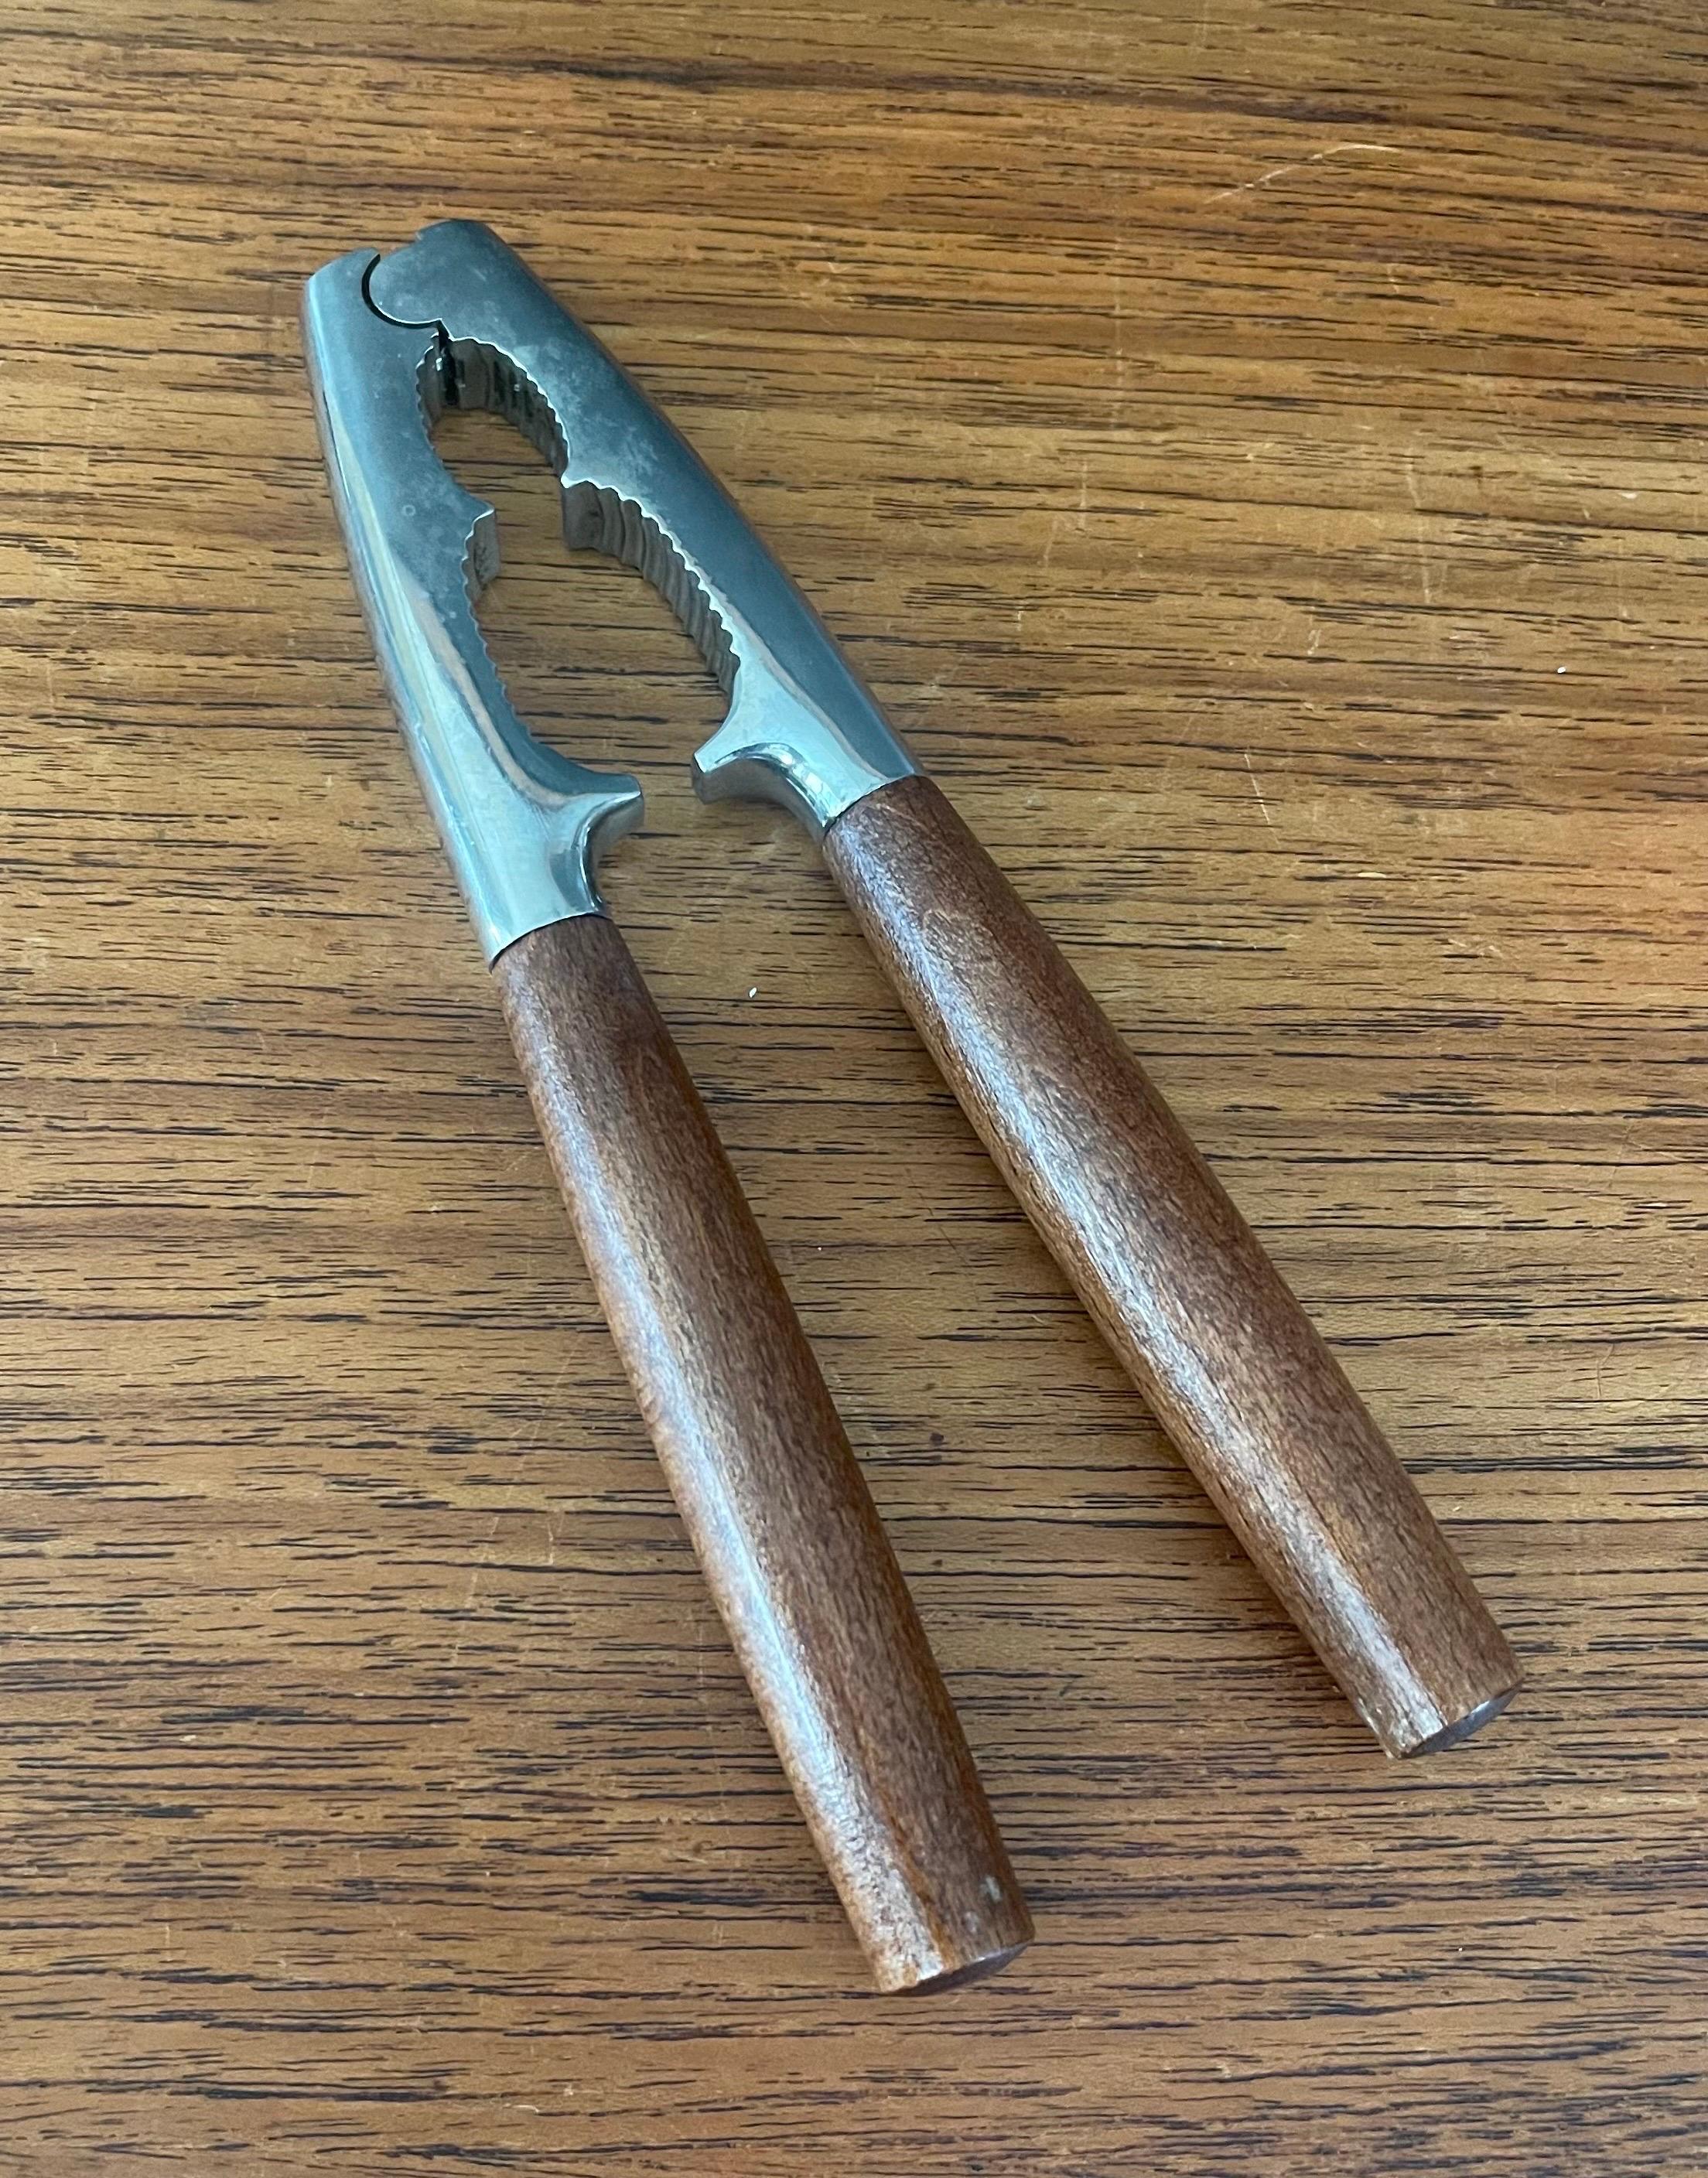 MCM walnut and stainless steel nutcracker made in Germany, circa 1980s.  The nutcracker is in good vintage condition with a beautiful walnut wood grain and Stainless steel fittings; it measures 2